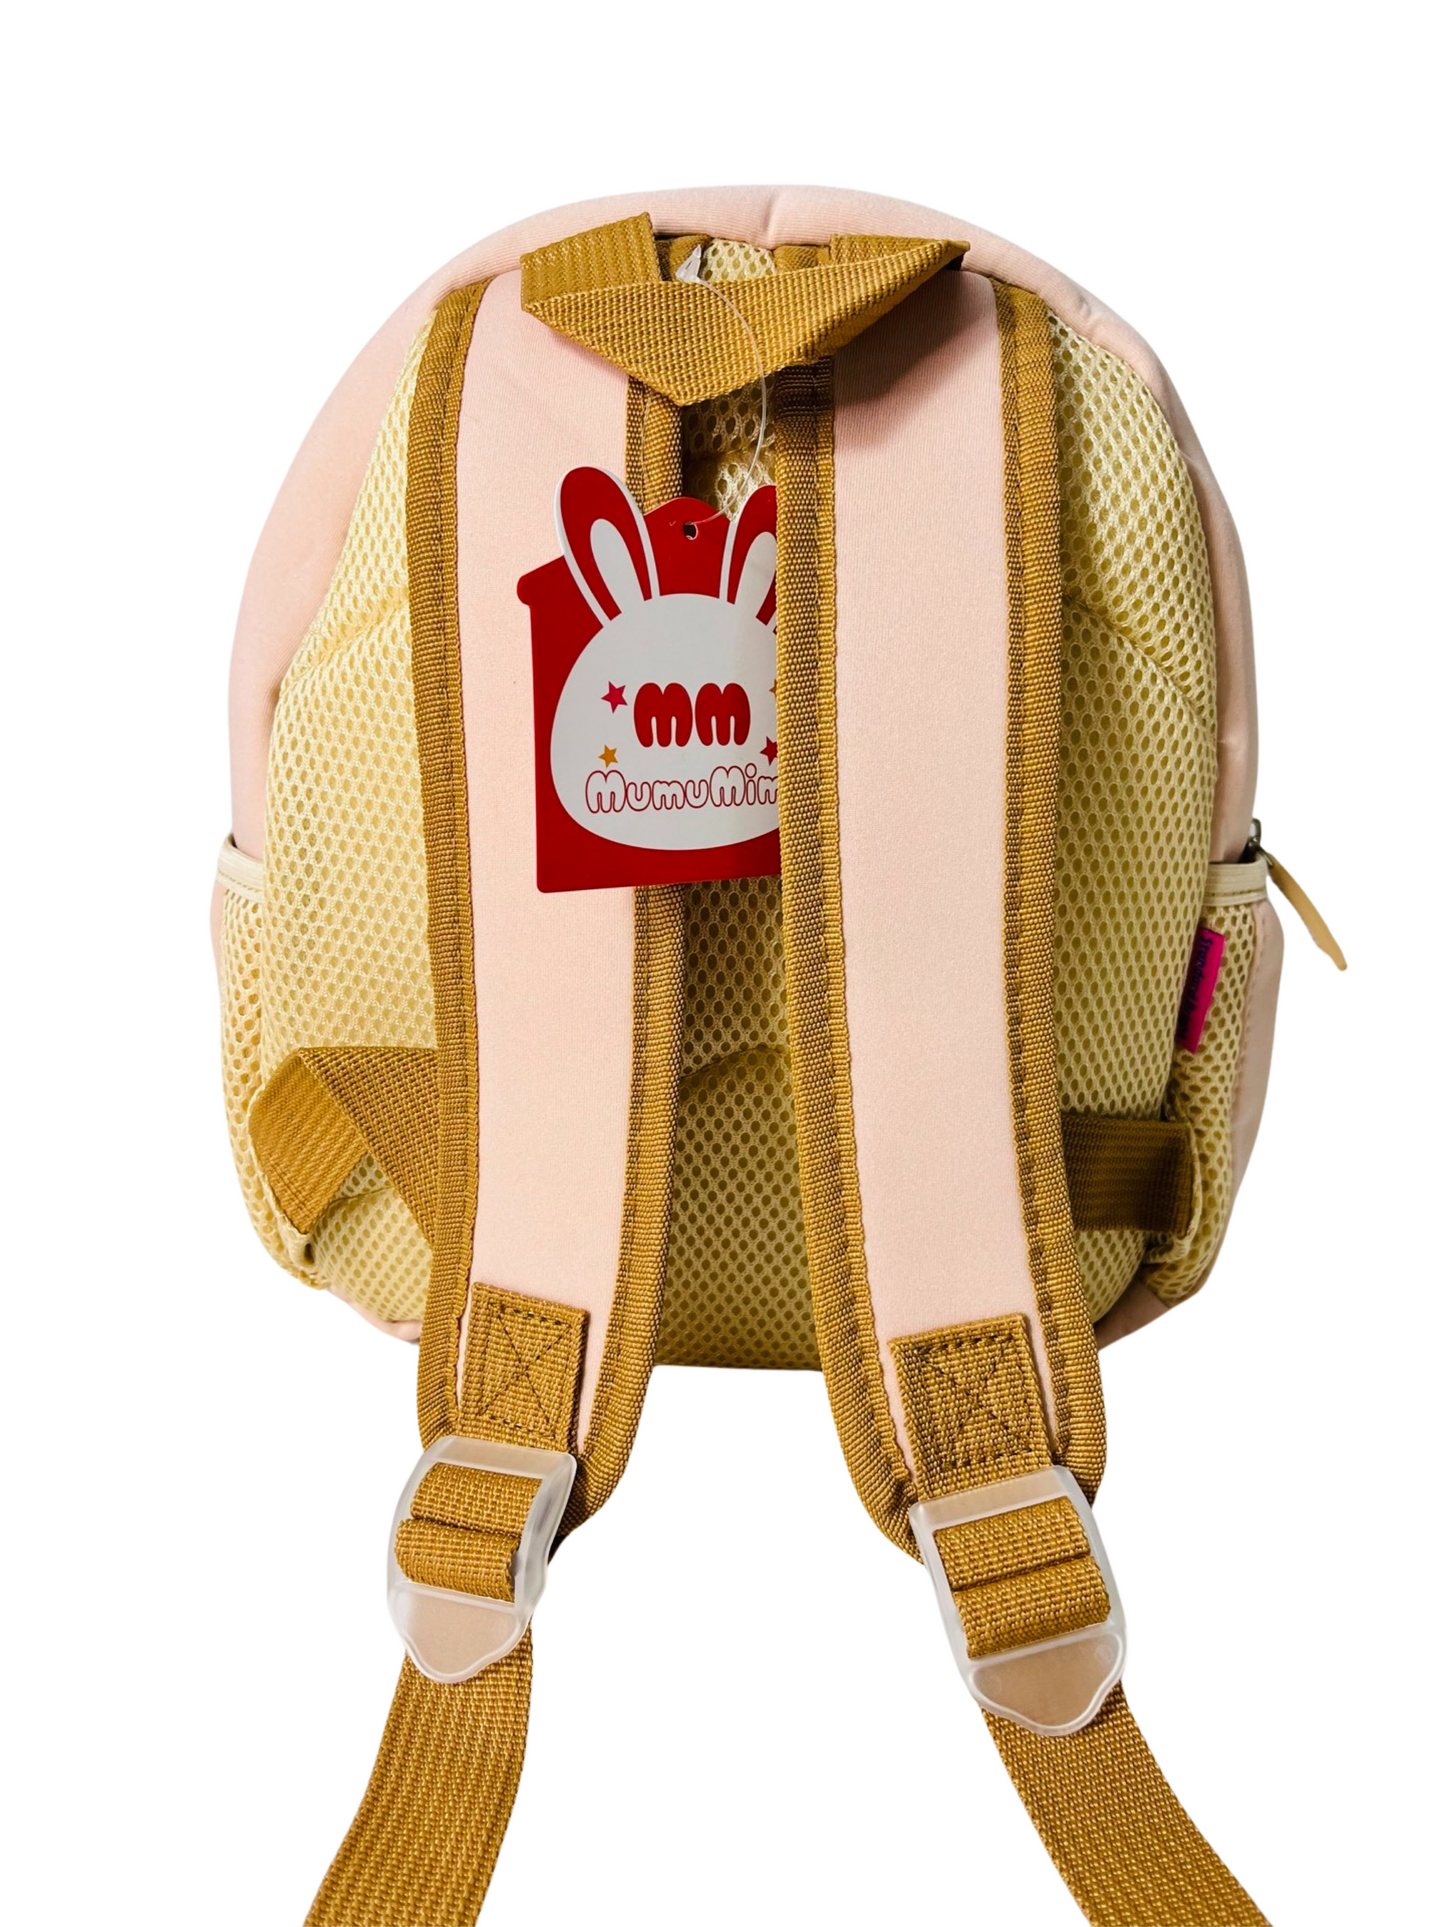 Cute Baby Reindeer Soft Plush Backpack with Front Pocket for Kids